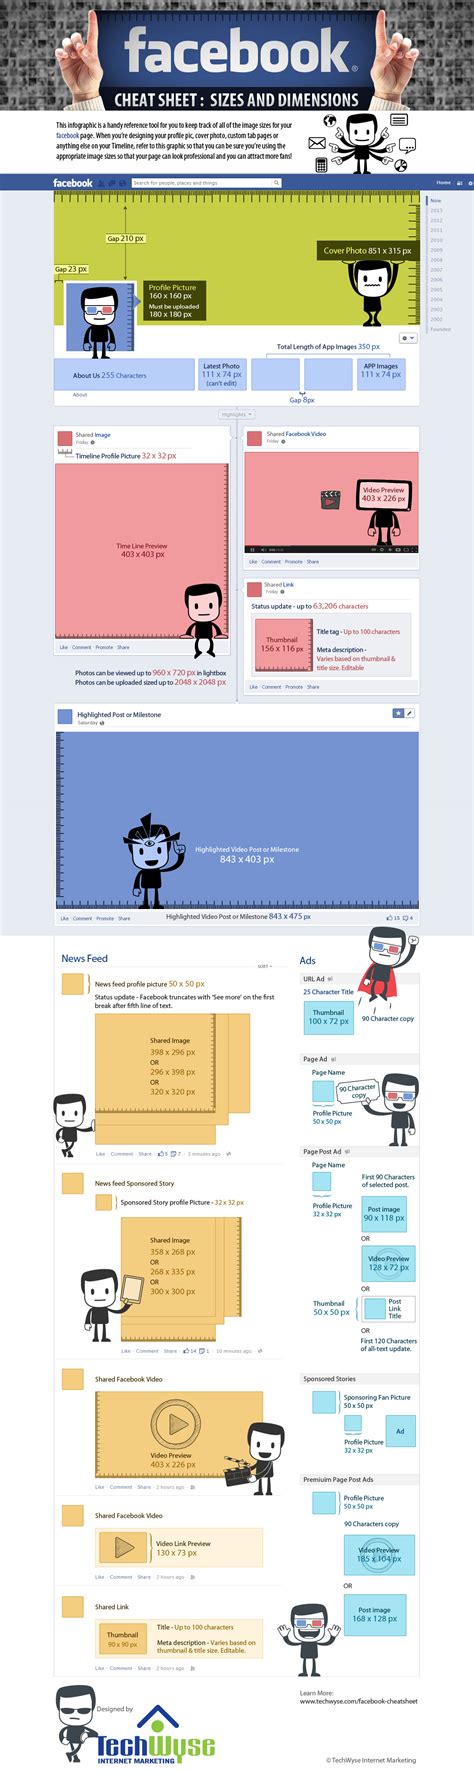 Facebook Cheat Sheet Image Size And Dimensions Infographic Reverasite